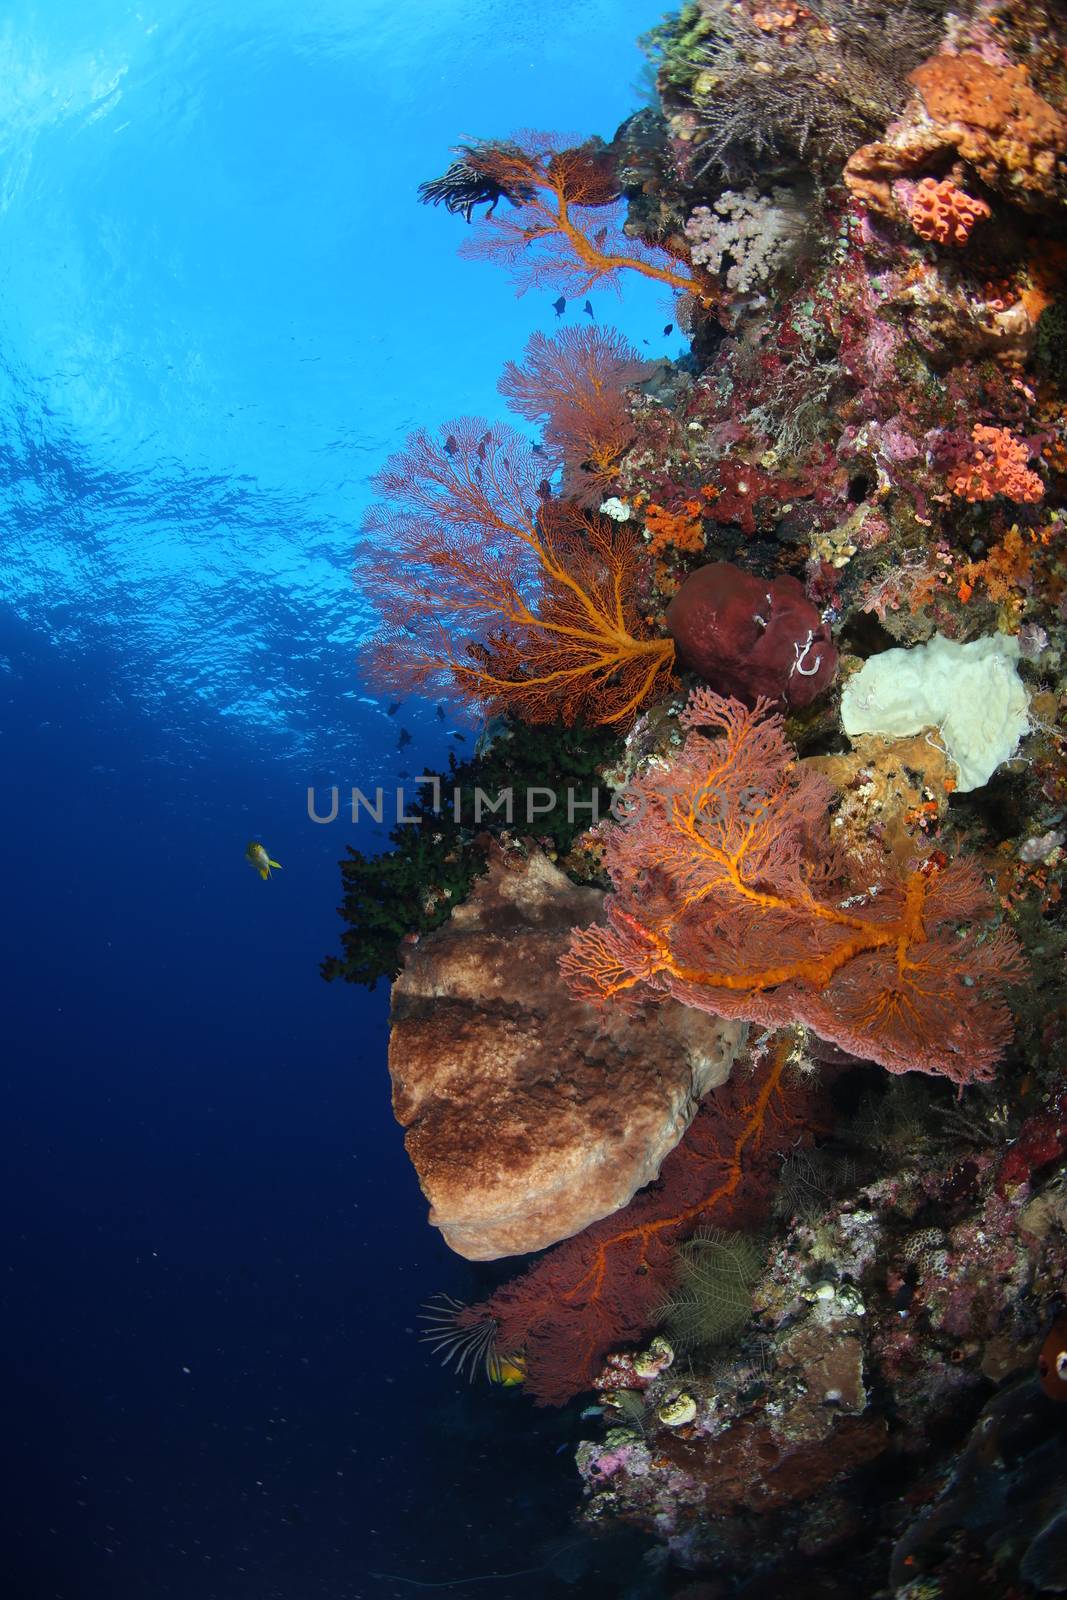 coral life diving Underwater Papua New Guinea Pacific Ocean by desant7474